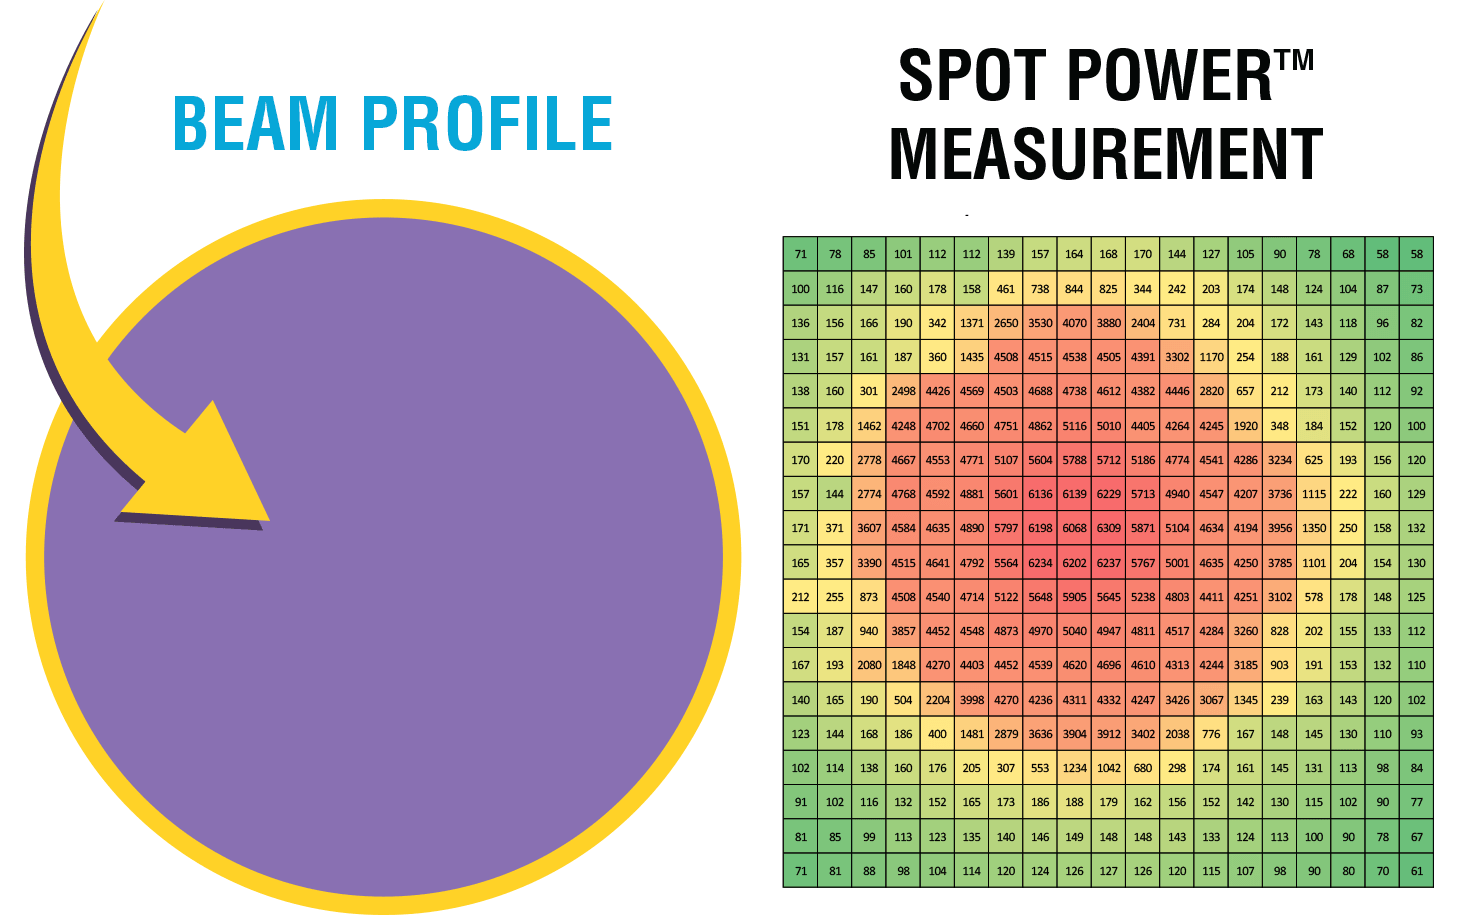 Spot Power Measurement of Beam Profile - from Tracer Products